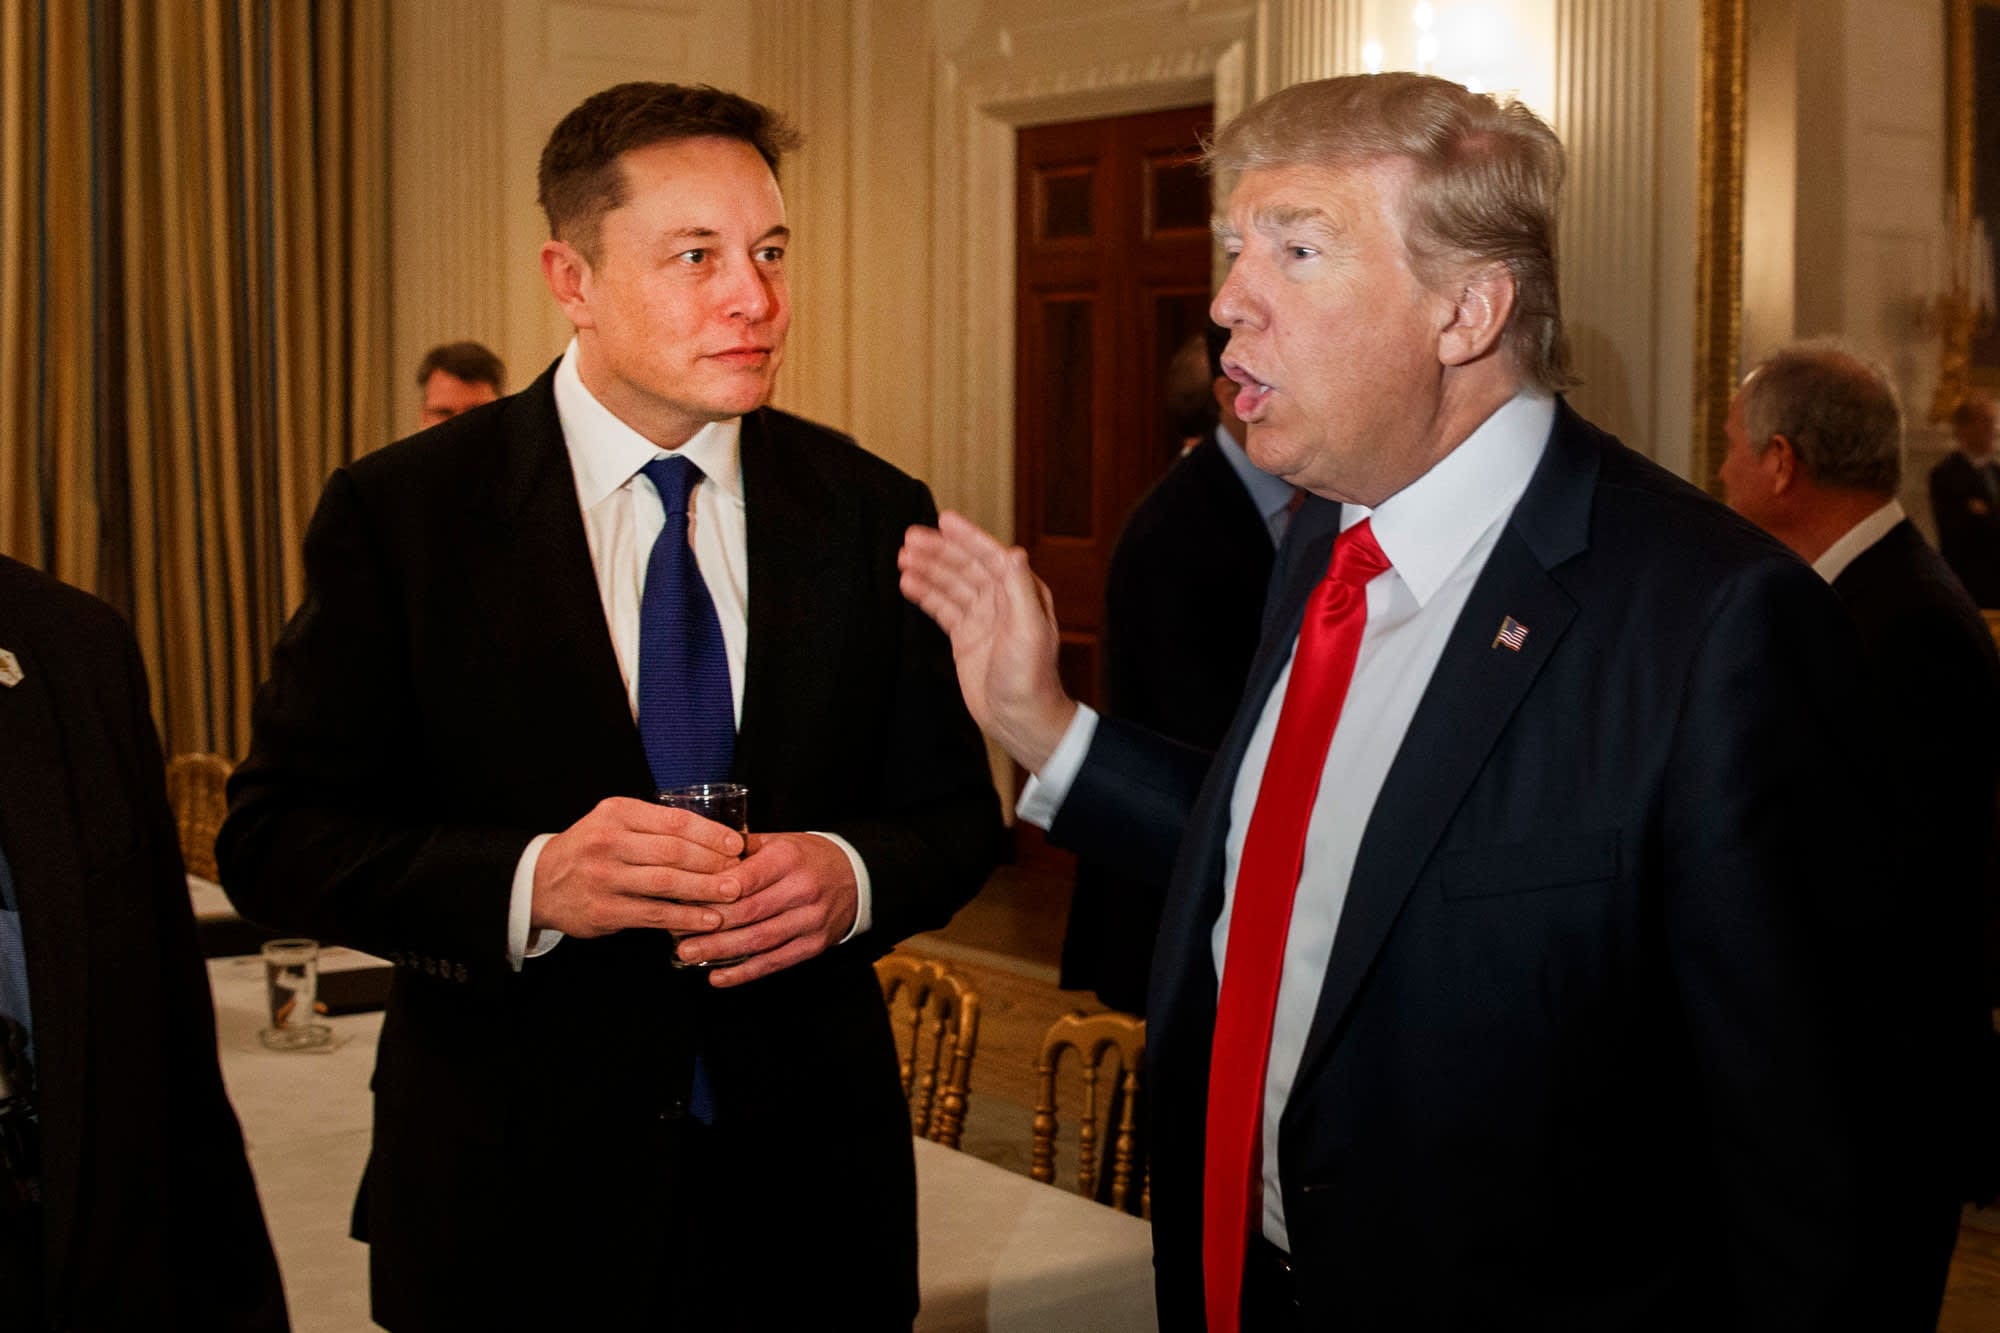 Trump and Musk Forge Unexpected Alliance in Palm Beach Summit